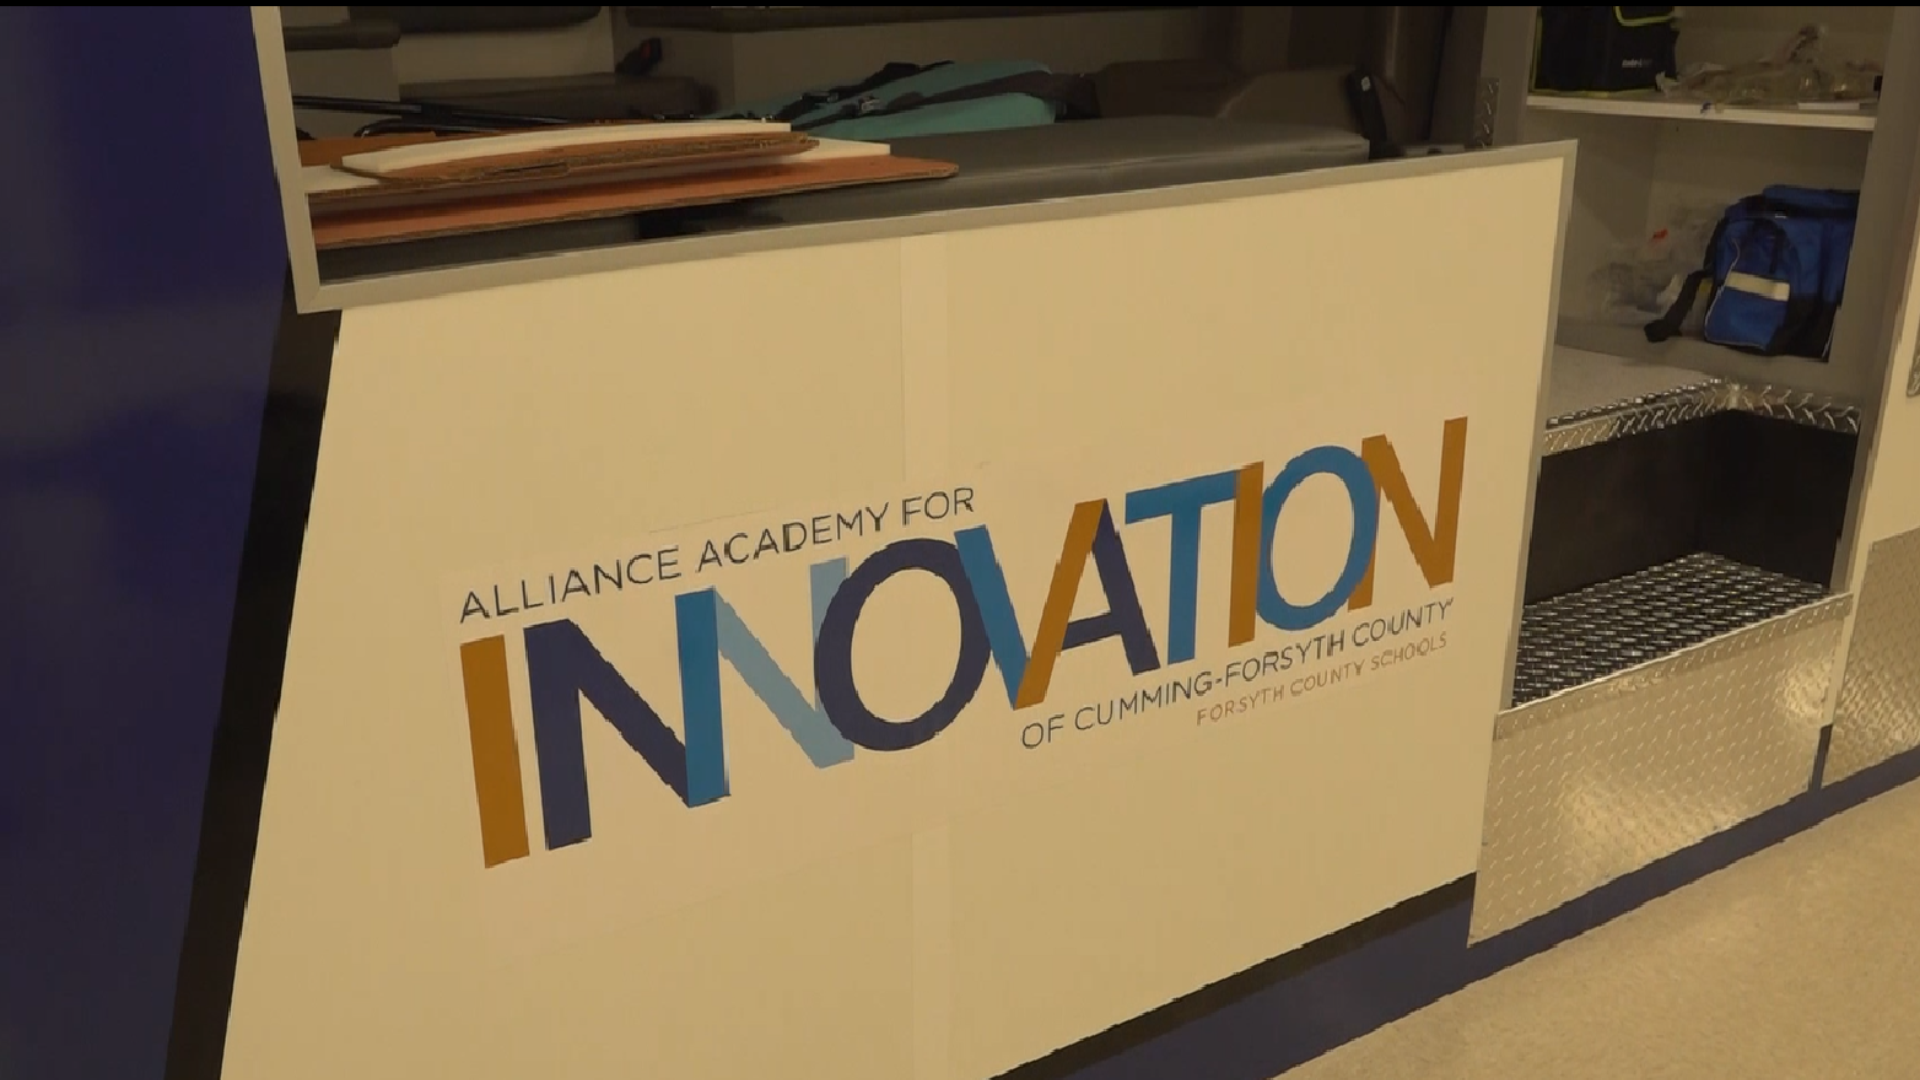 Alliance Academy for Innovation has completed its first semester of classes, and the students are excited to cotinue learning.